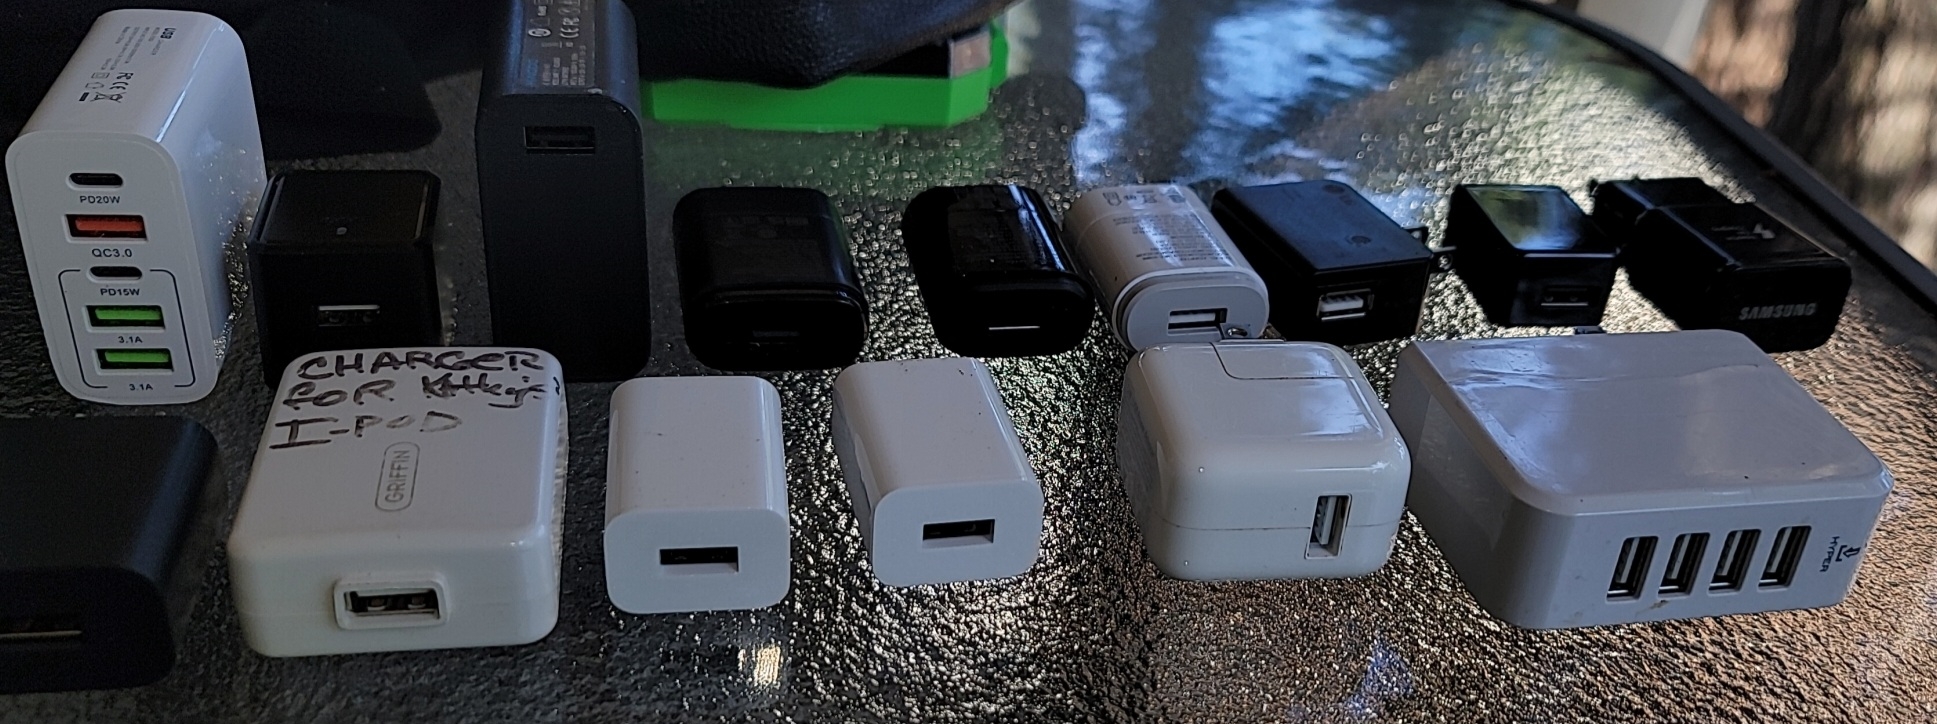 USB CHARGER LEAKAGE TEST COLLECTION.jpg